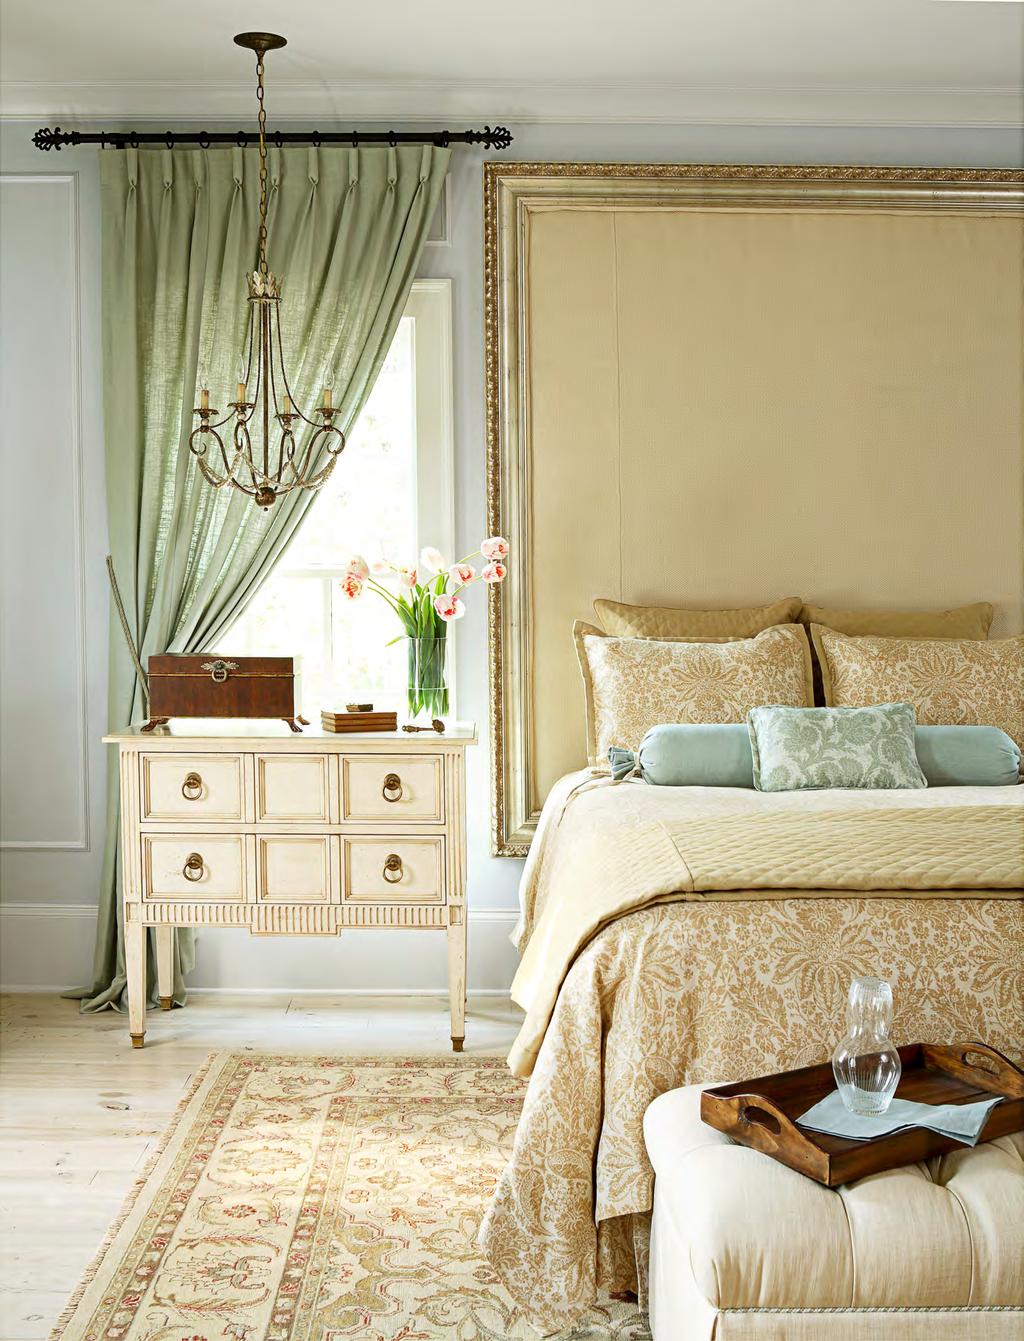 68 DECORATING fall 2008 This room is elegant and feminine, but at